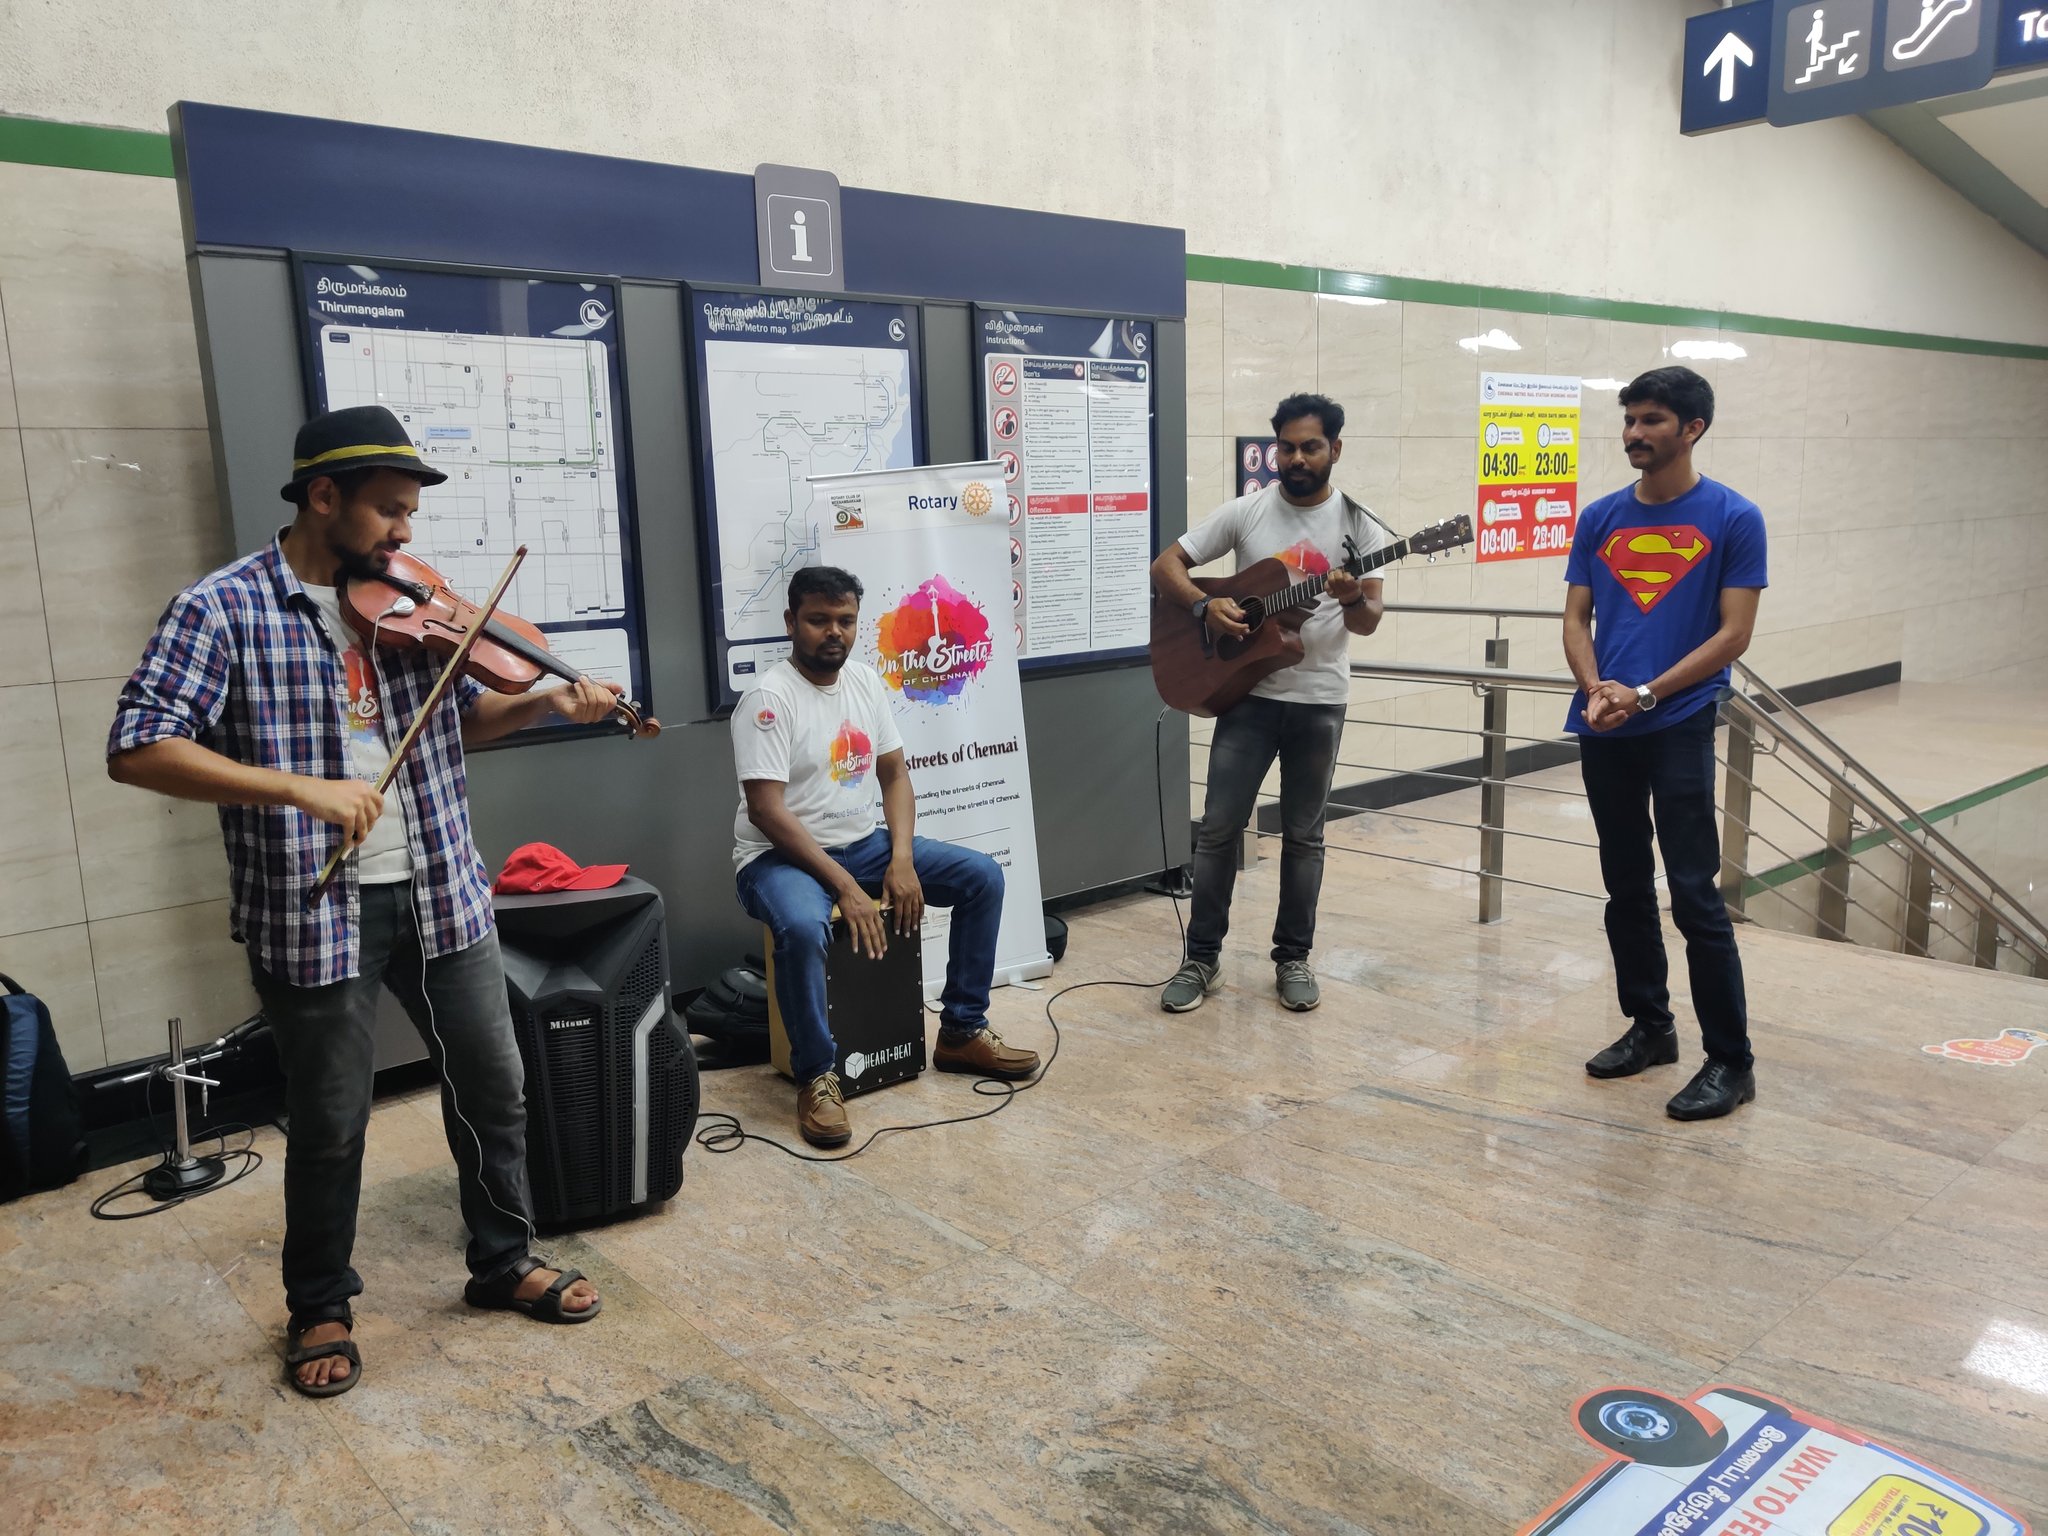 Metro Music Edit 2019 is the New Technique of CMRL to Cover Passengers